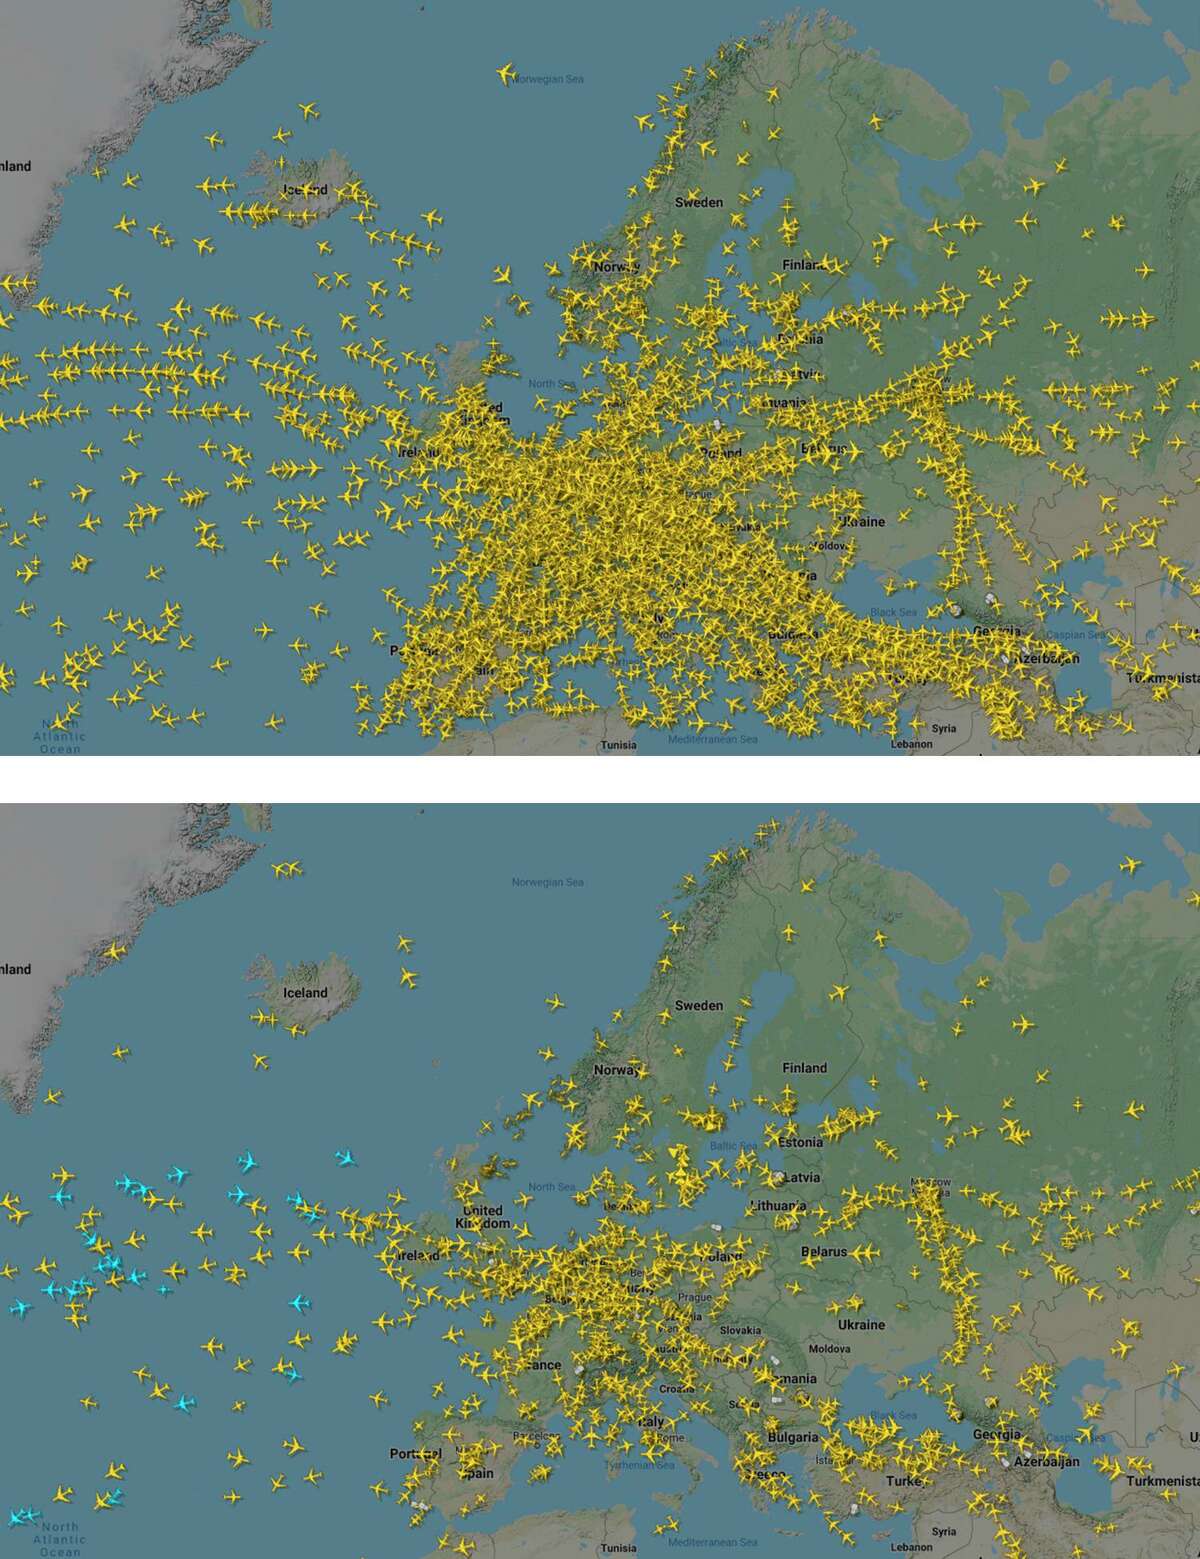 An overview of air traffic across the European Union on Dec. 18, 2019, above, and on March 25, 2020, below in imagery provided by Flightradar24 on Wednesday, March 25, 2020.